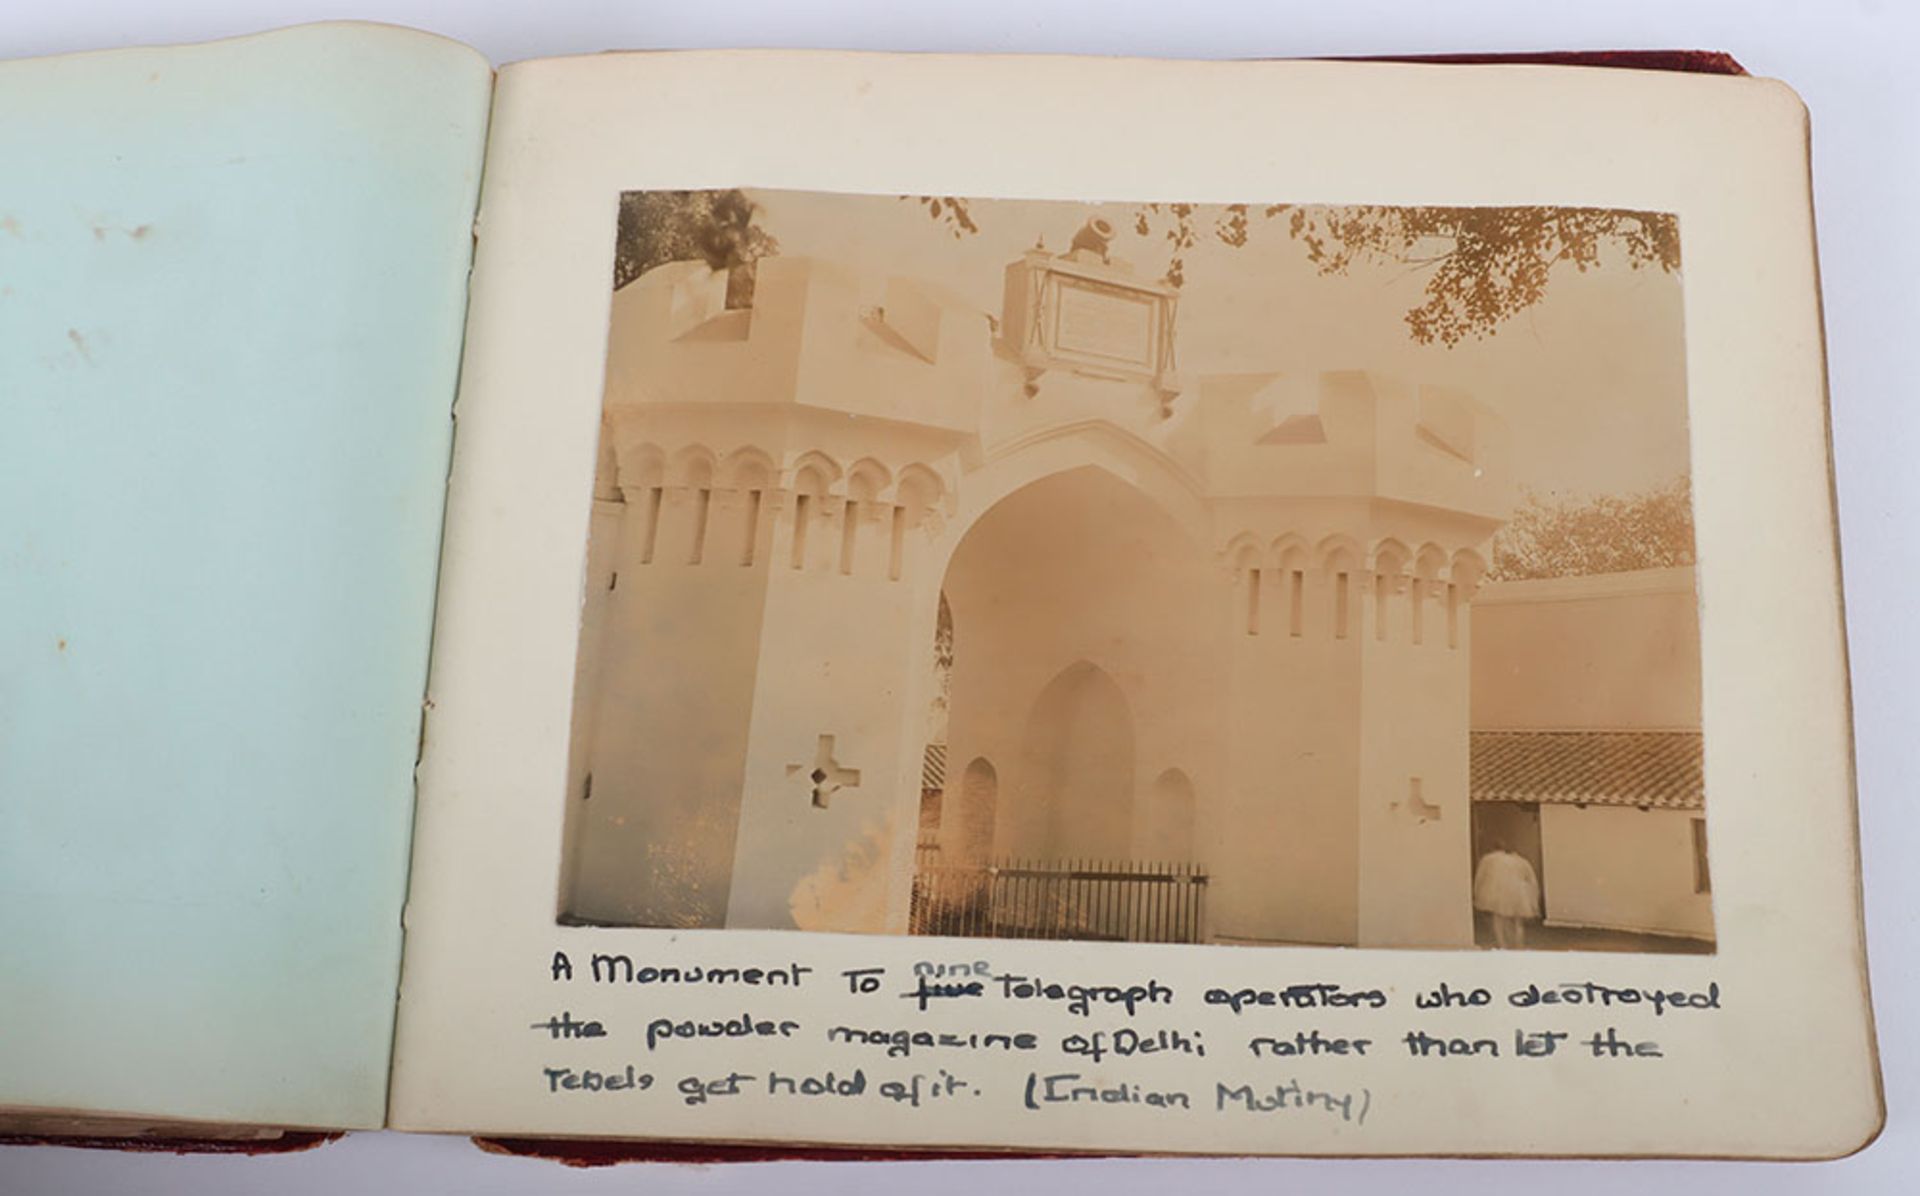 Photograph Album with images of ther Delhi Durbar, troops lining streets, Elephants, sacred cows bel - Image 34 of 48